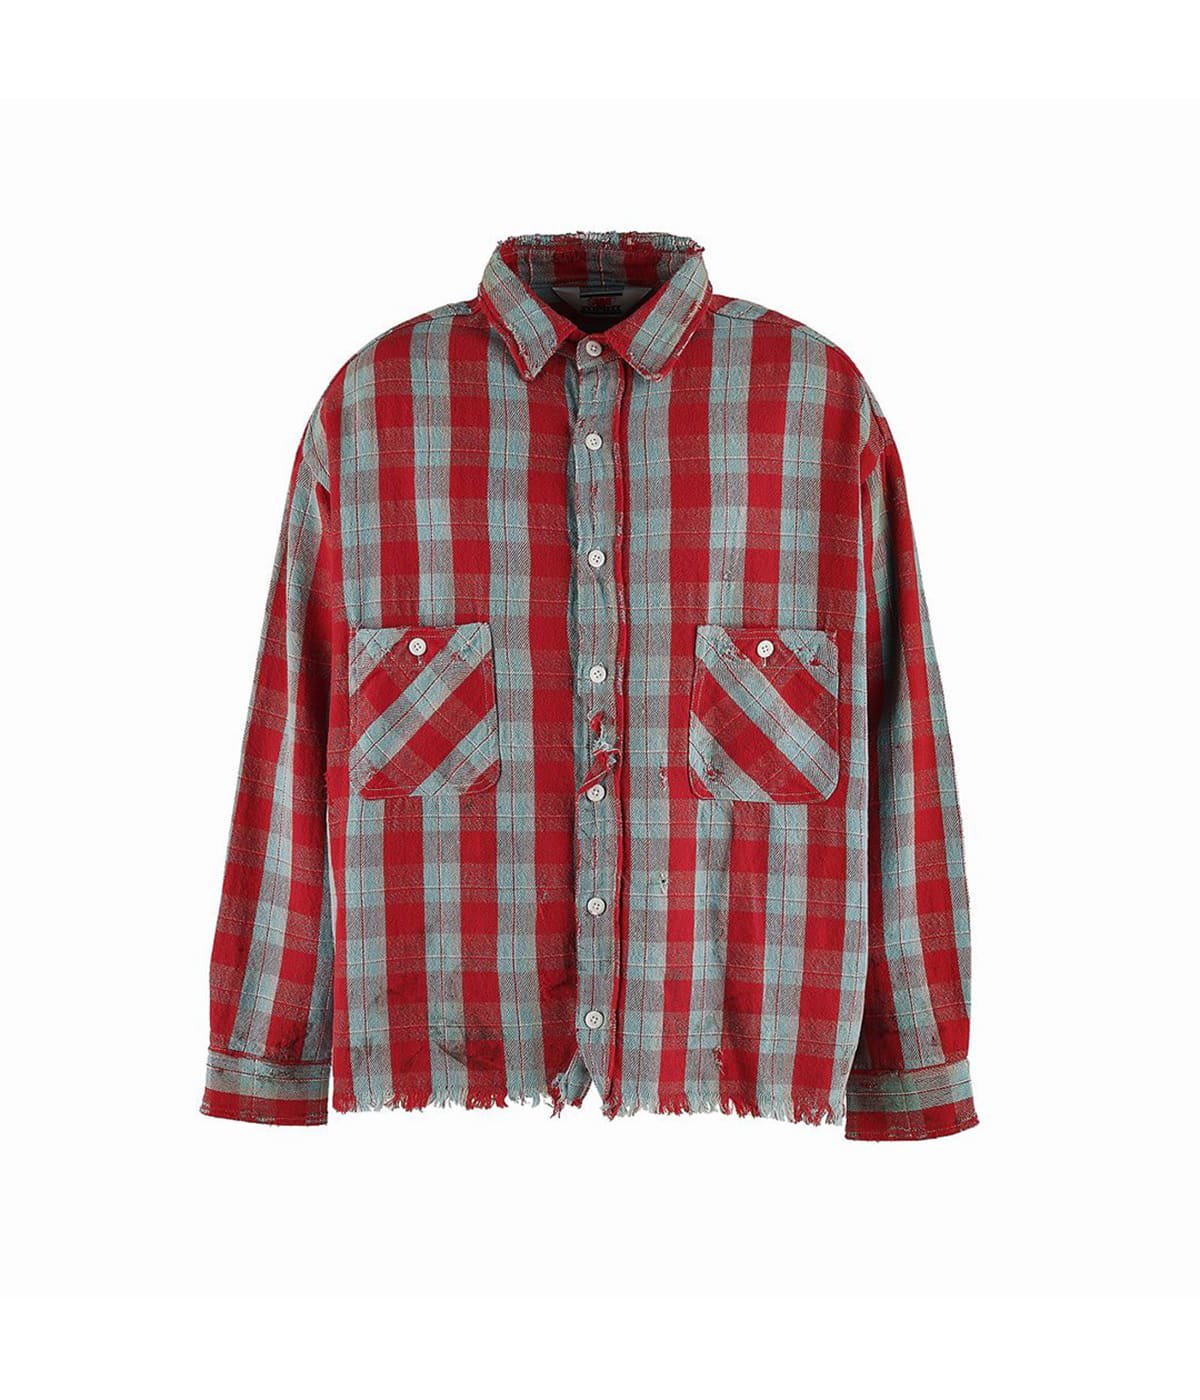 FRNL CHECK SHIRTS | SAINT Mxxxxxx(セント マイケル) / トップス 長袖 